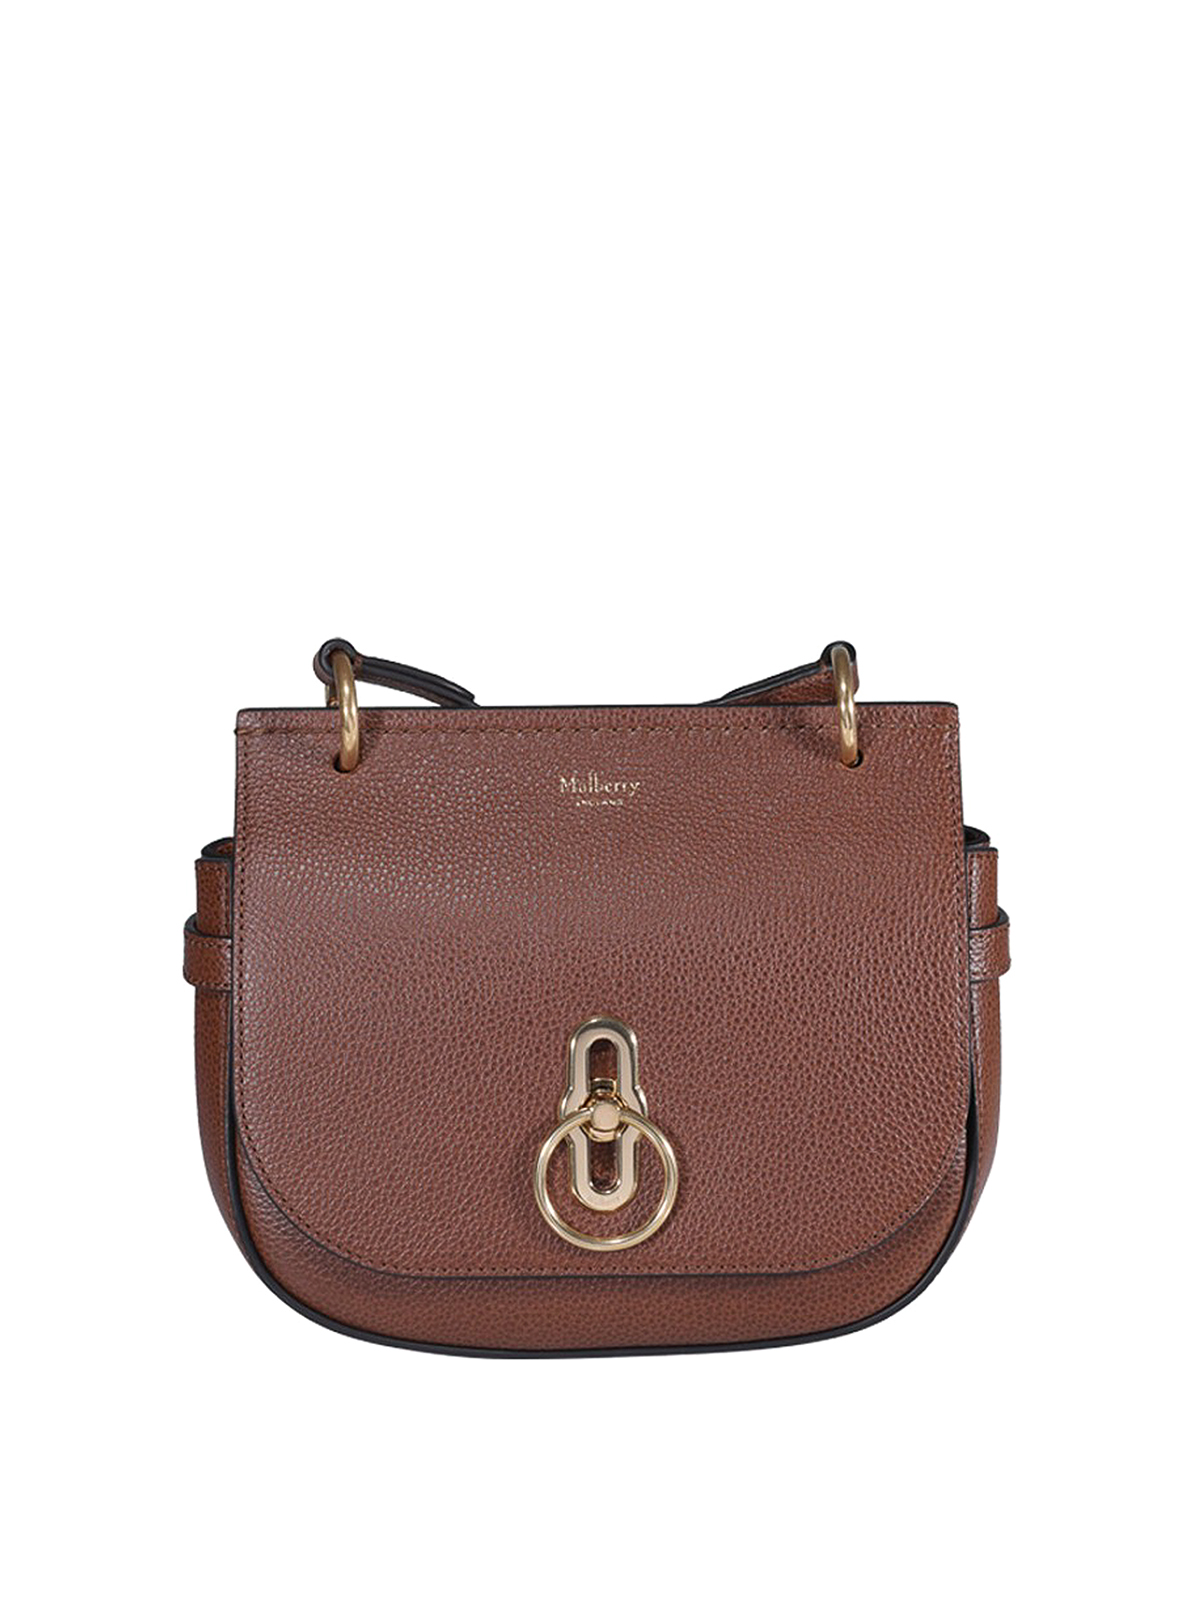 Cross body bags Mulberry - Leather bag - HH8731552G110